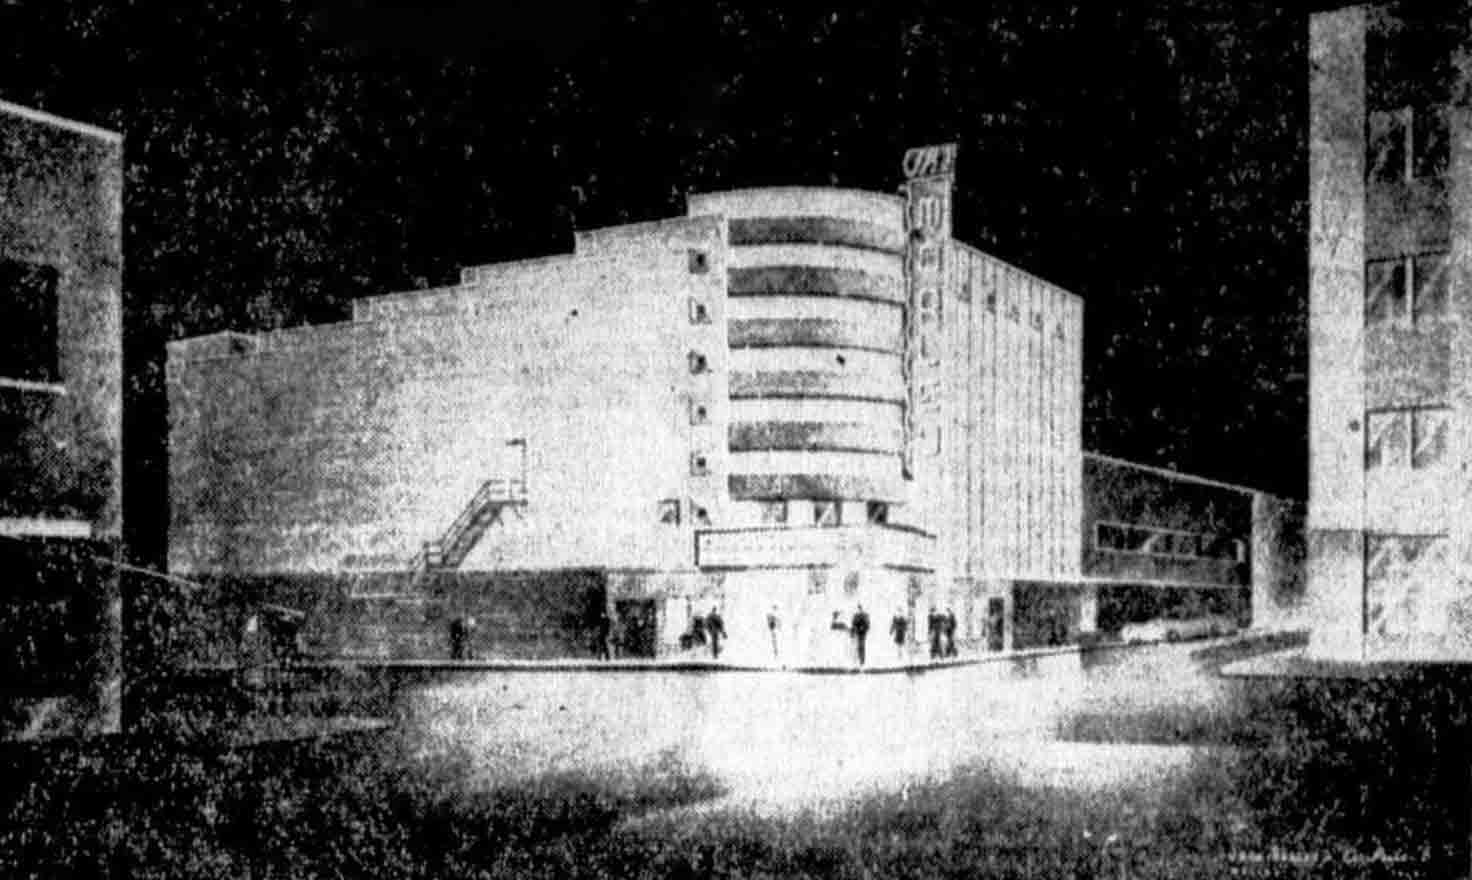 Black and white newspaper drawing of The Morley Theatre in 1946